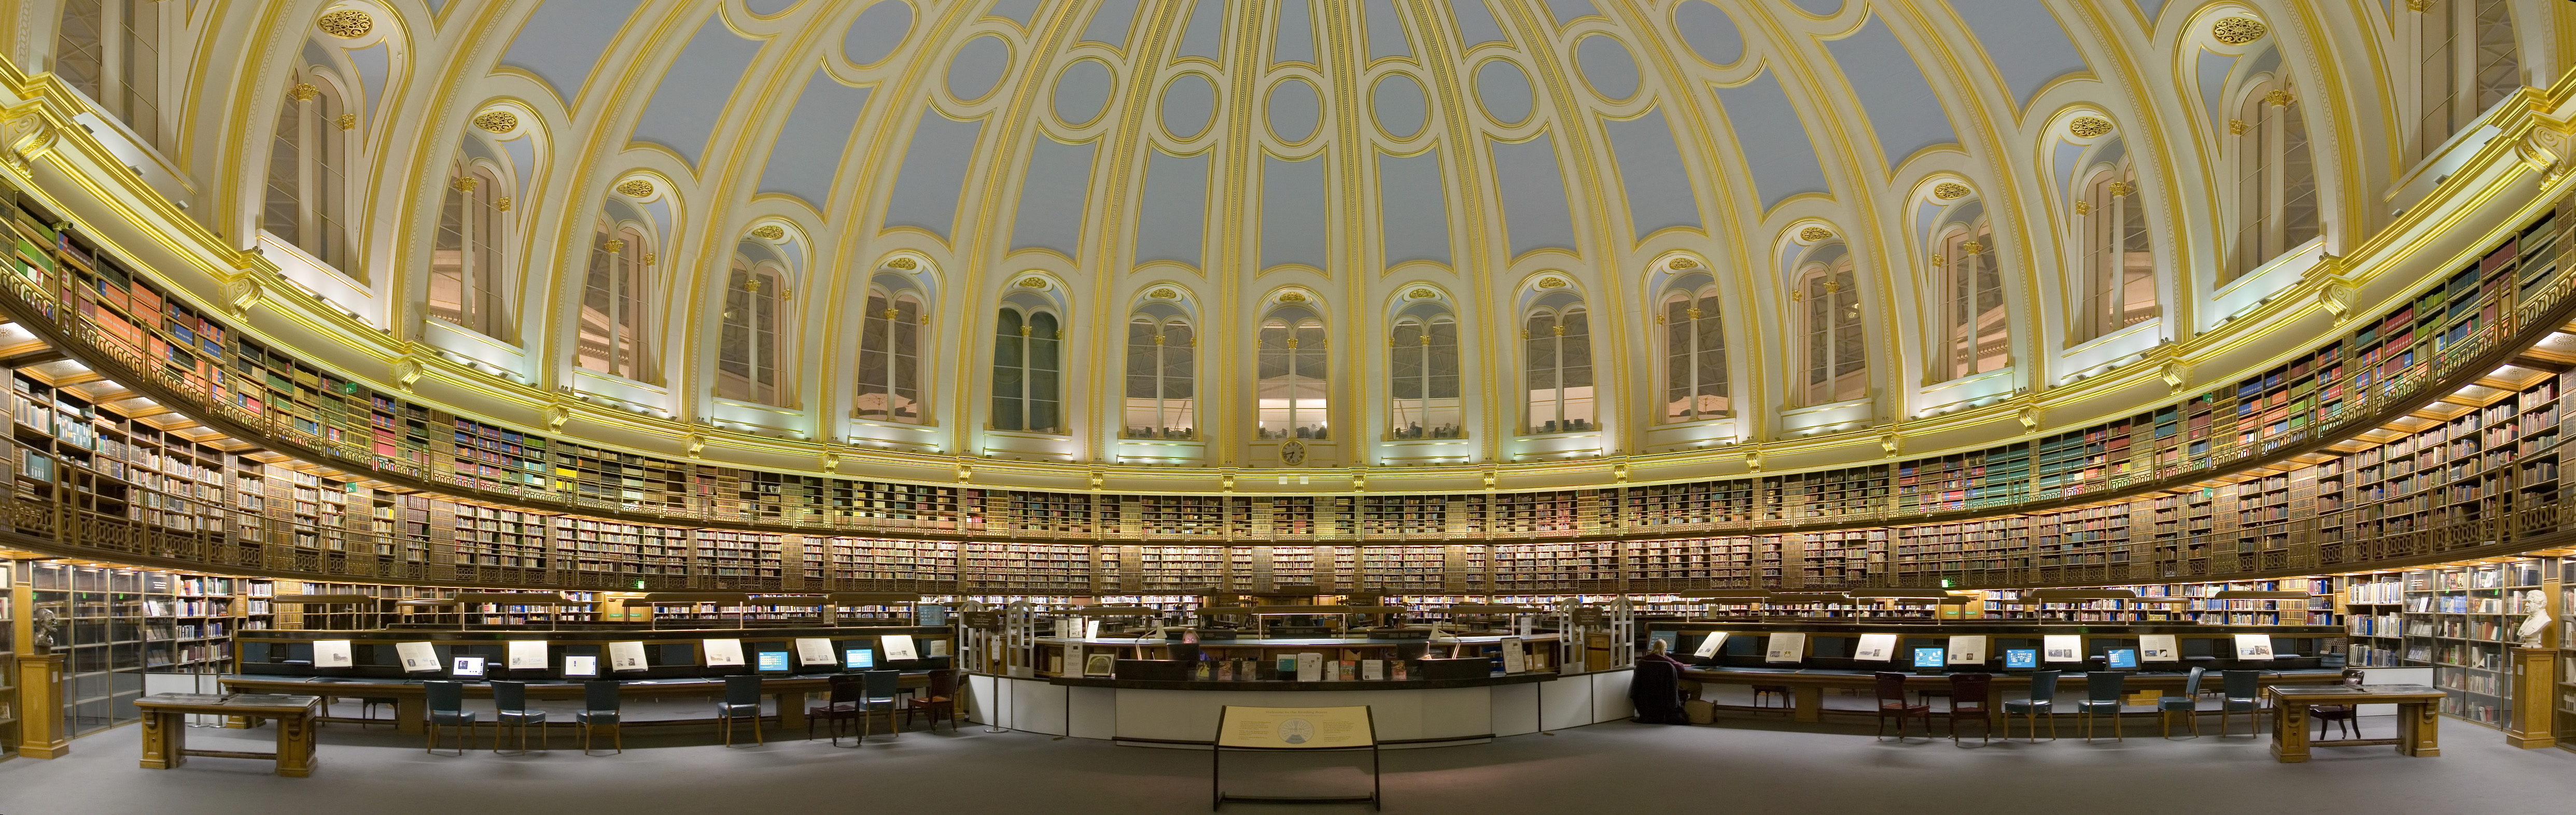 Man Made Library 4968x1572